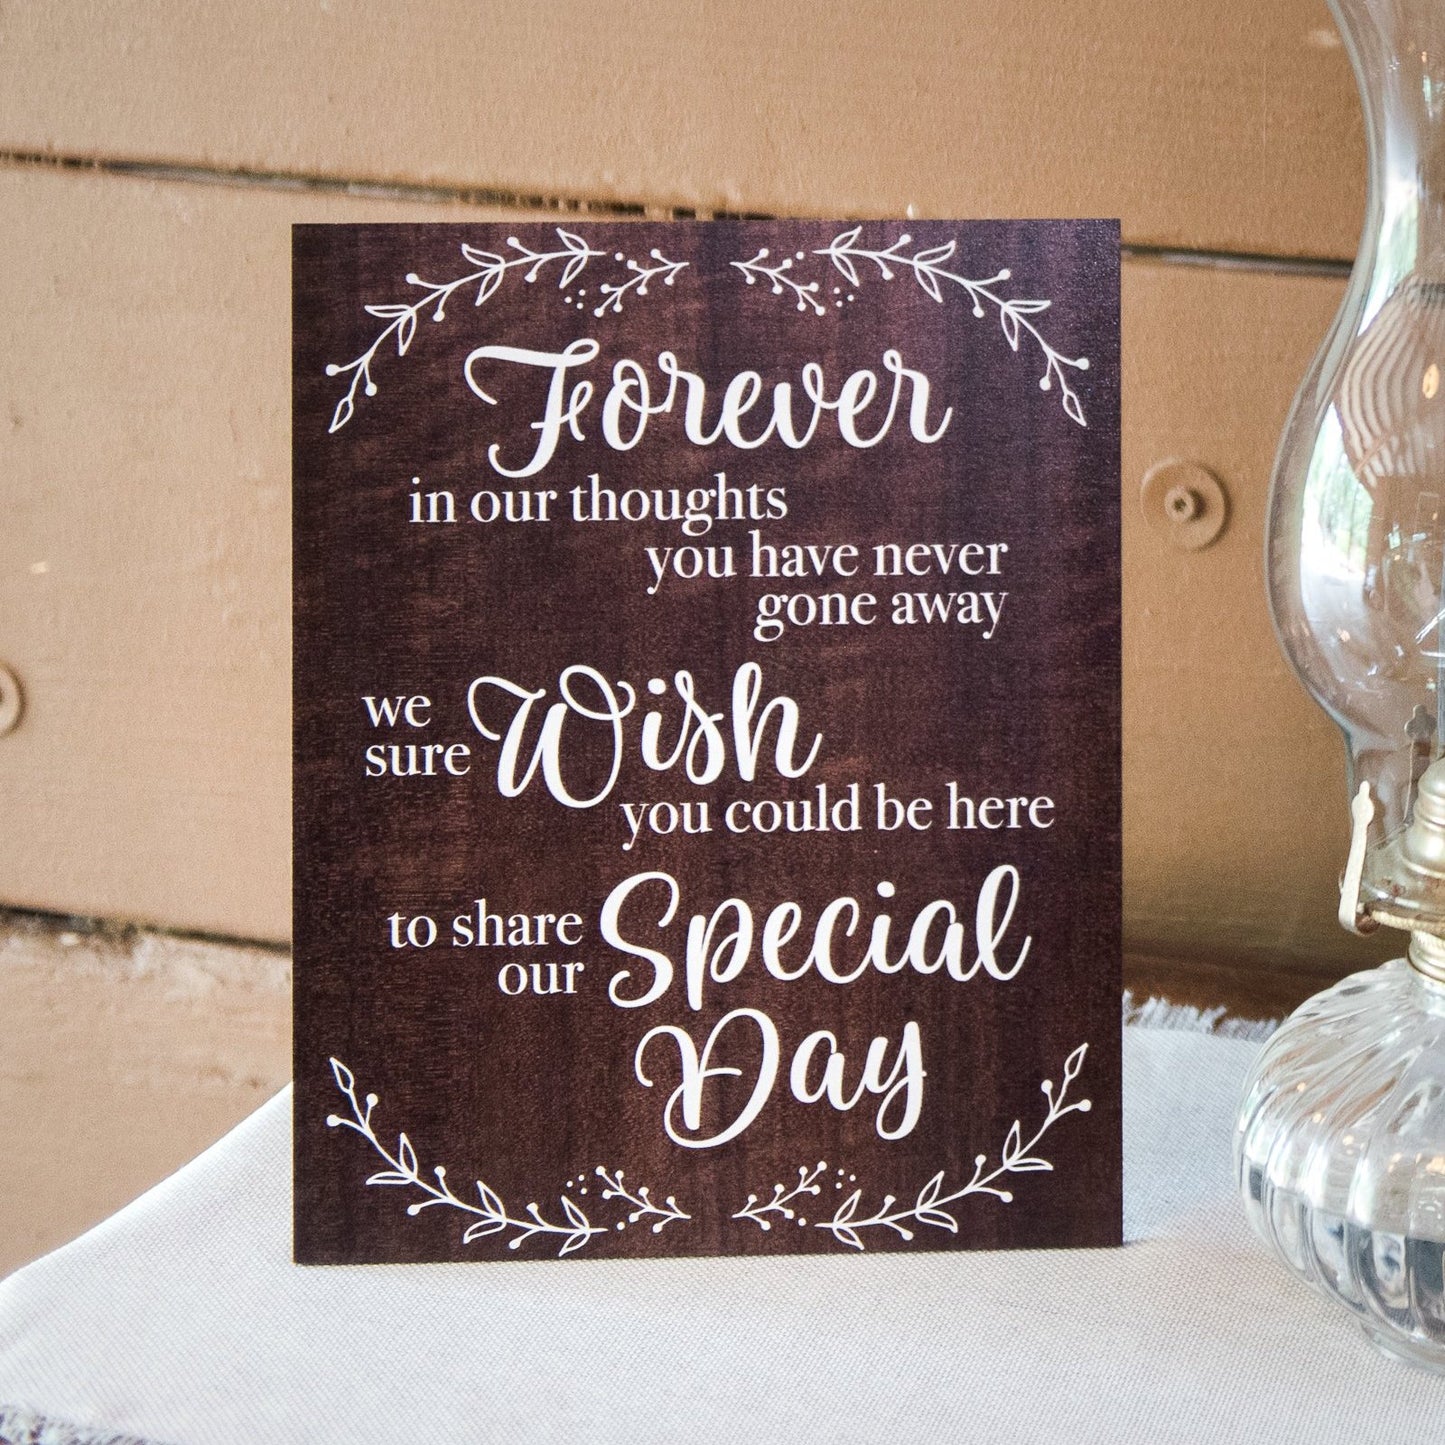 In Memory Wedding Sign - Wedding Decor Gifts